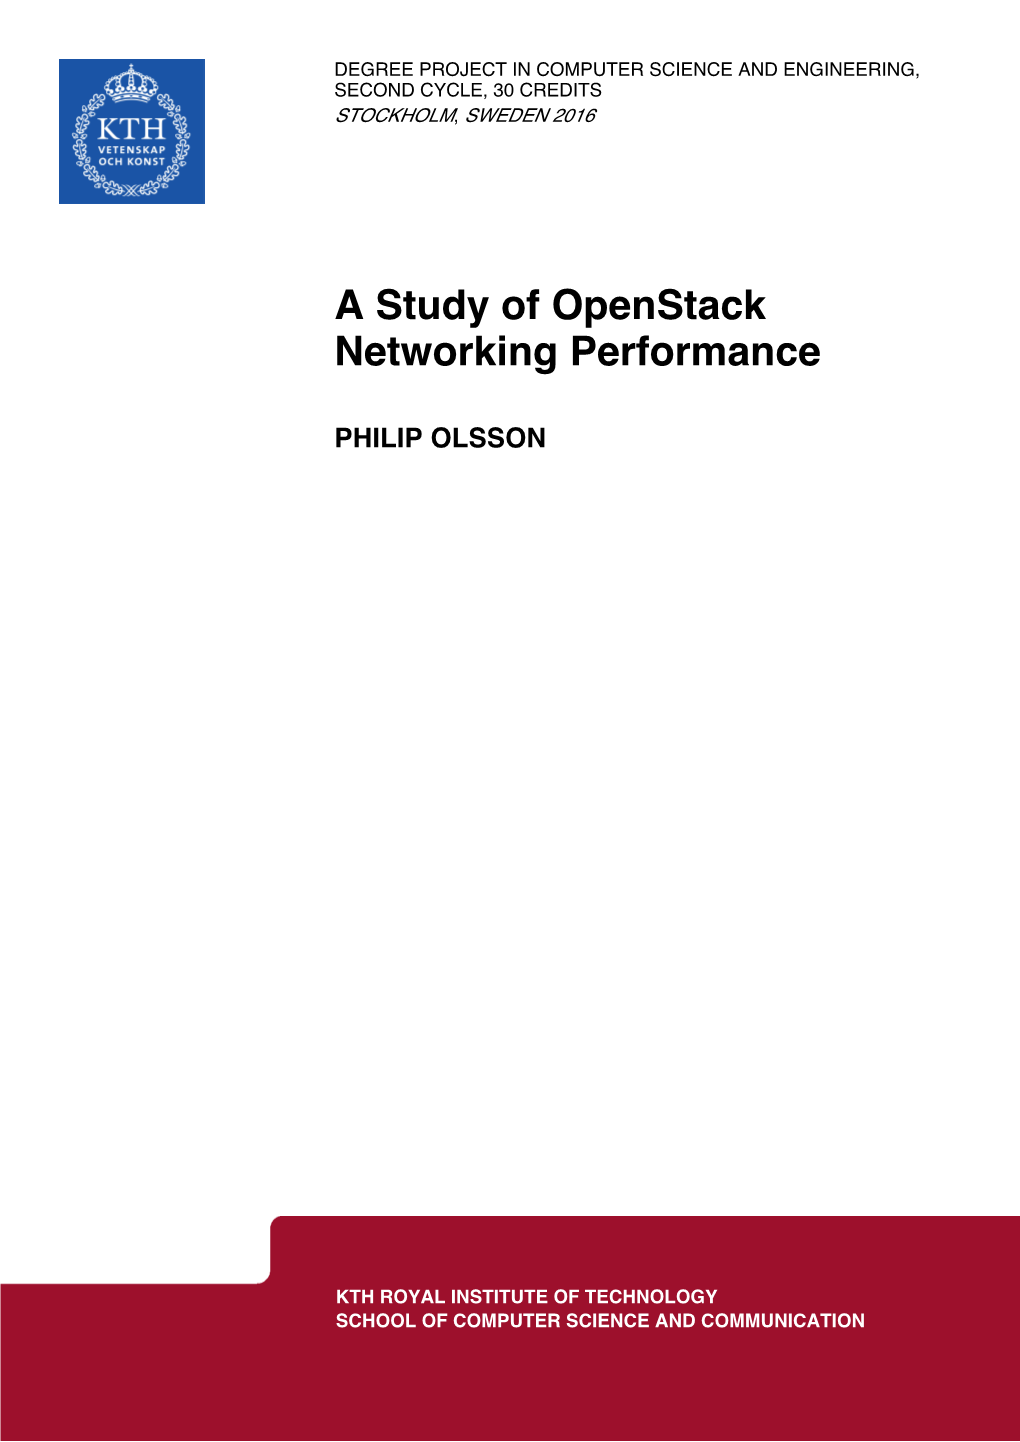 A Study of Openstack Networking Performance